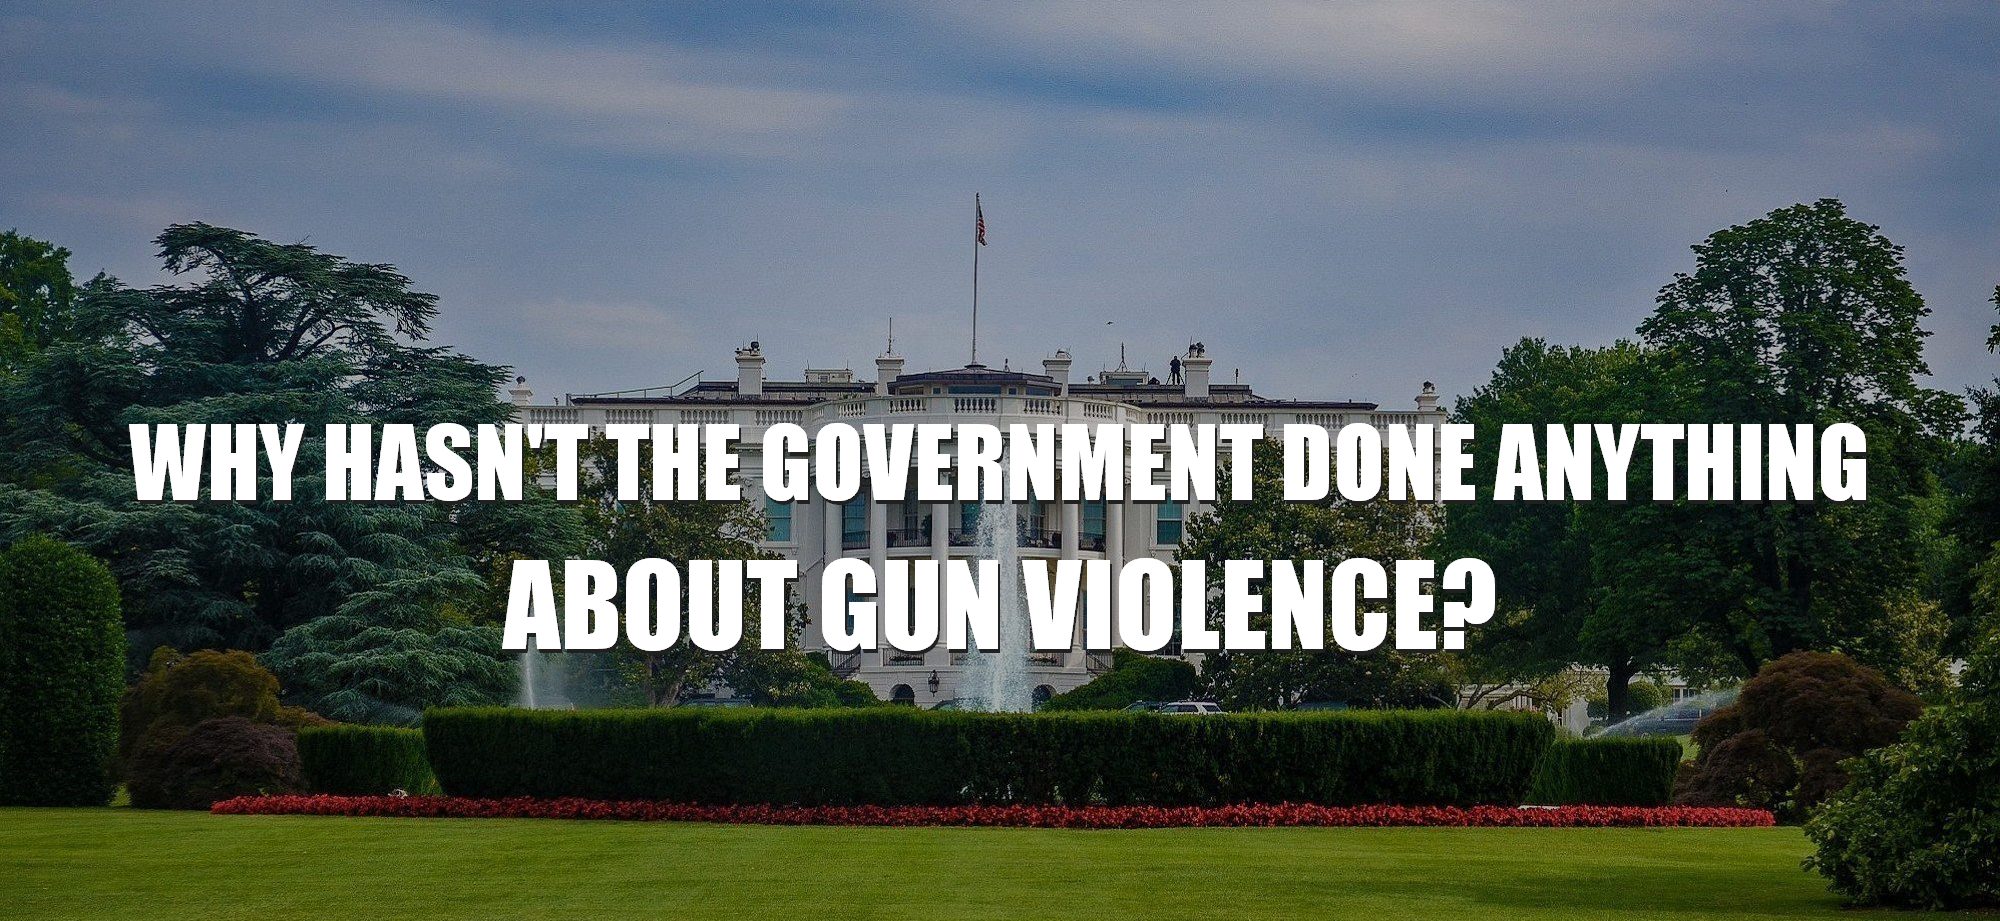 Why hasn't the government done anything about school gun violence assault weapons?